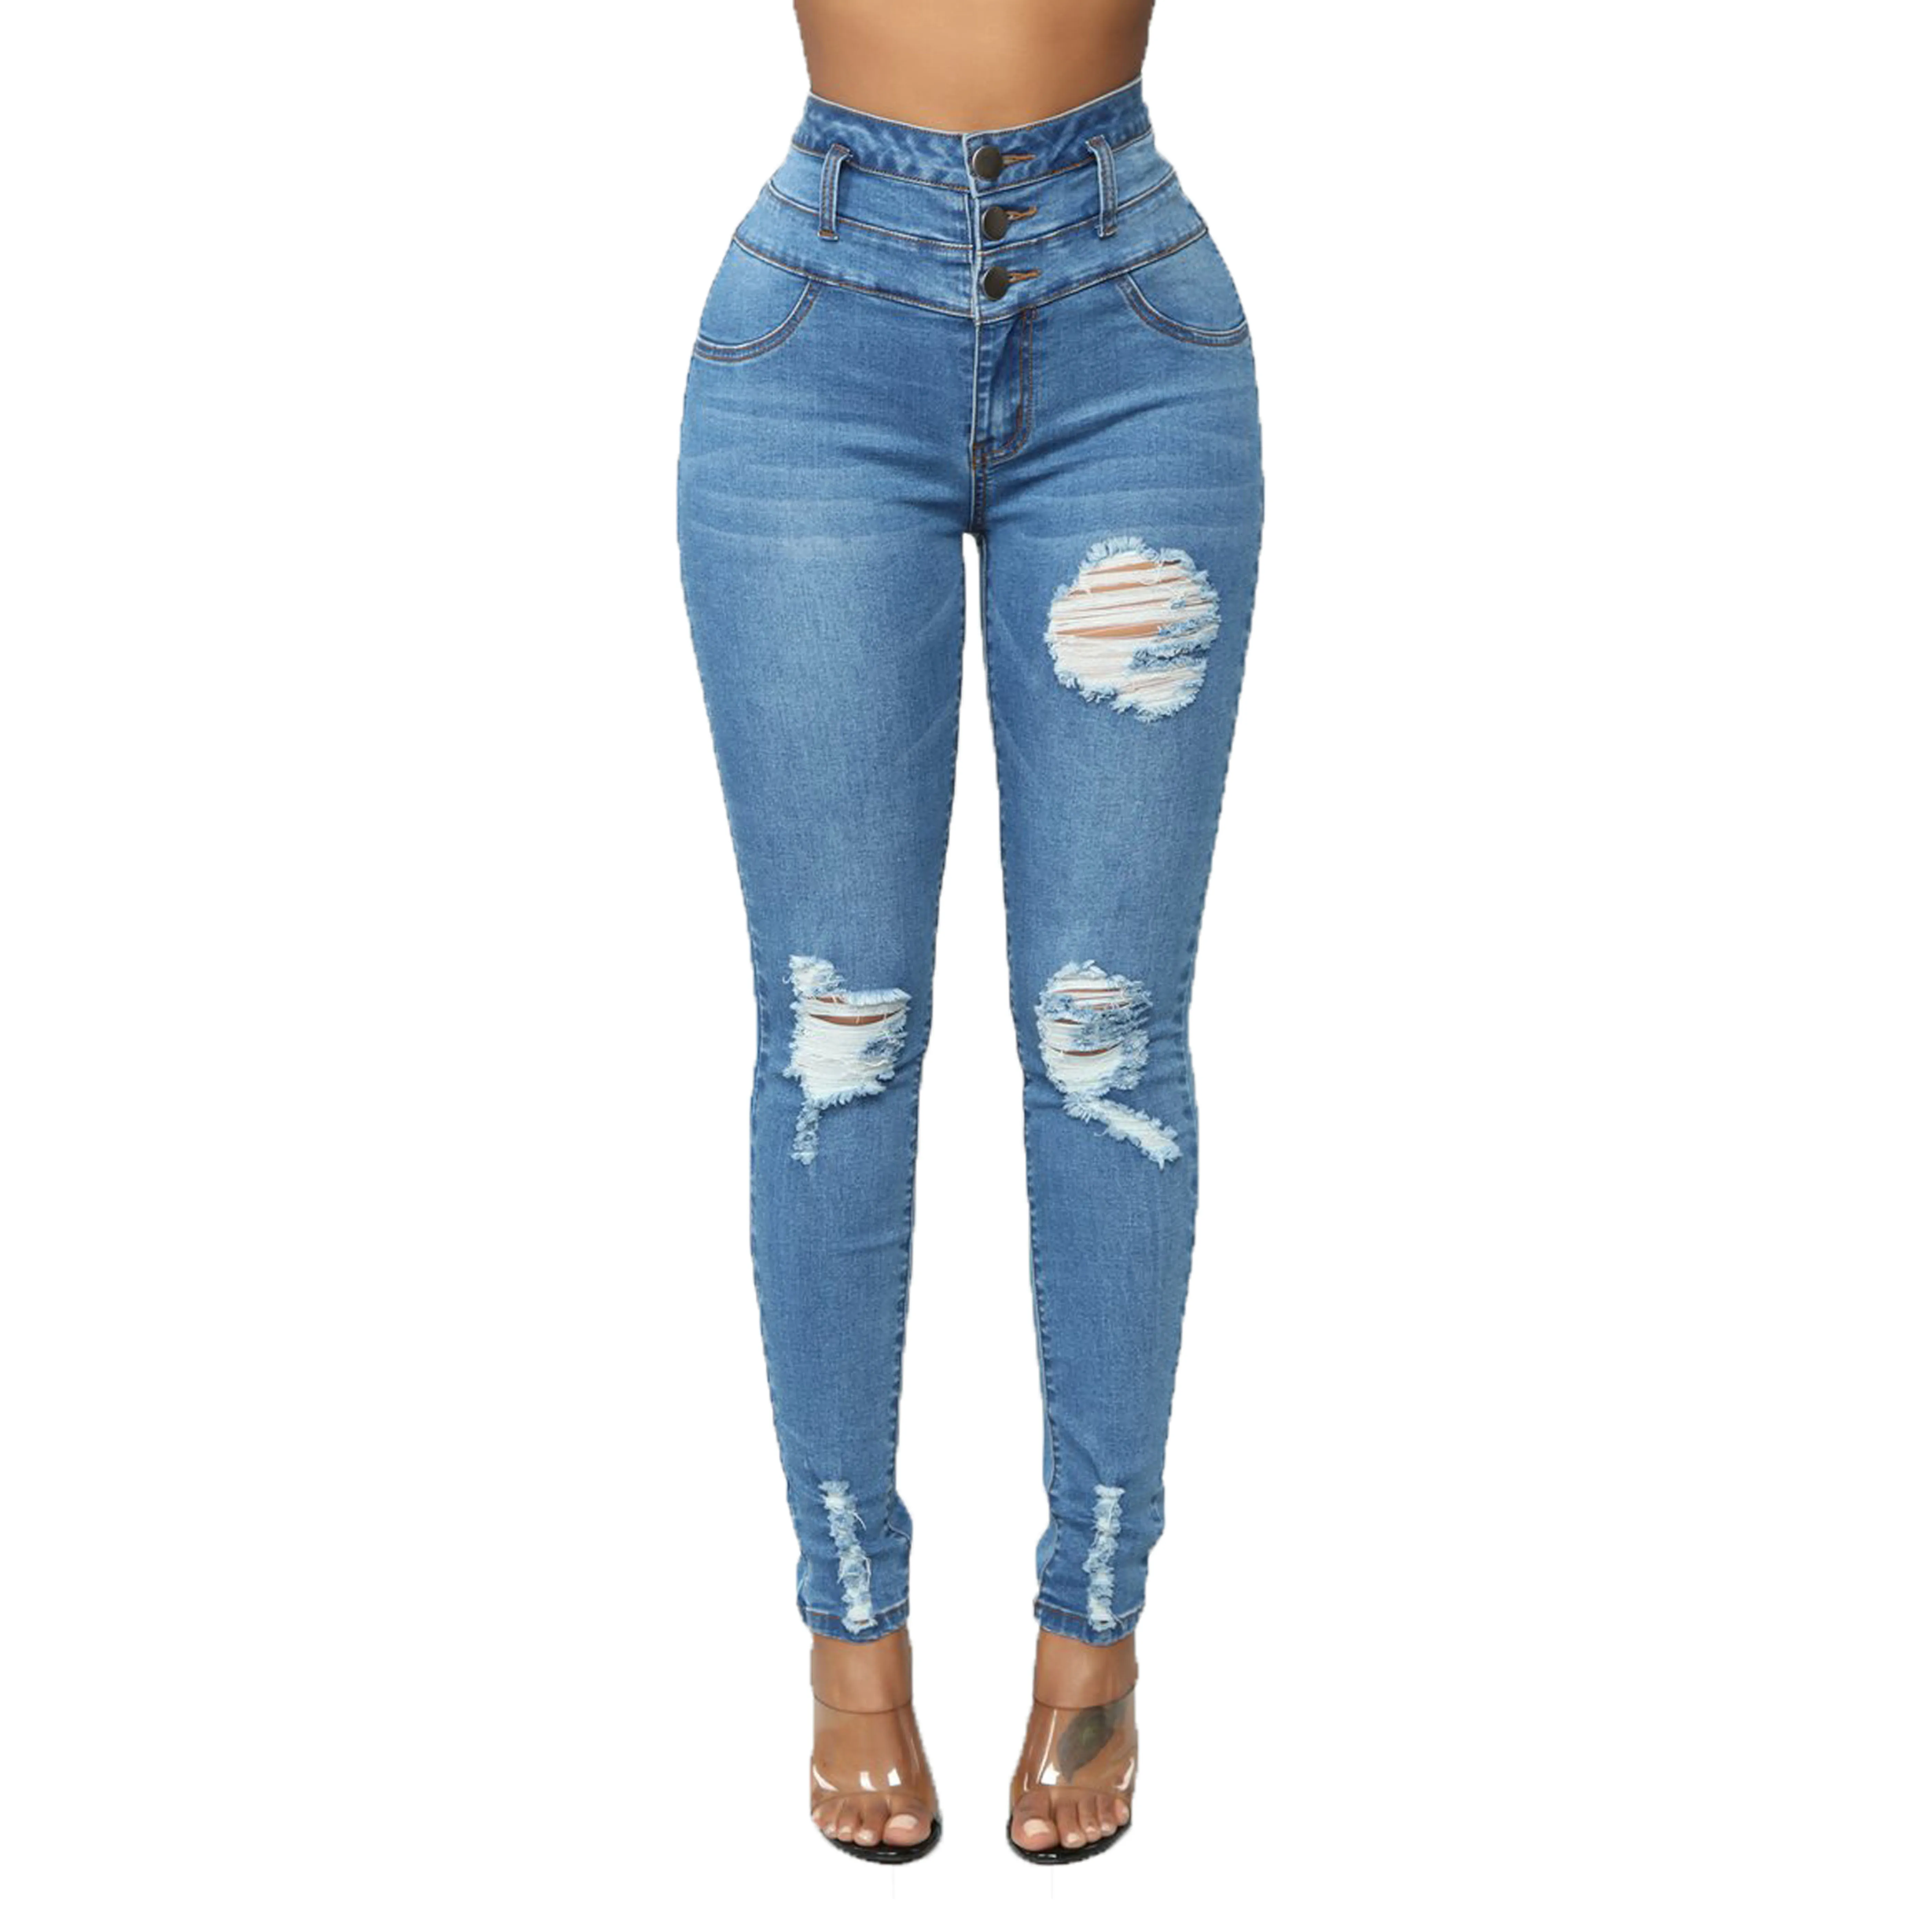 

Fashion Sexy Hot High-waisted Button Fly Super Stretch Skinny Destroyed Ripped jeans Women Washed denim long pencil pants Ladies, Blue